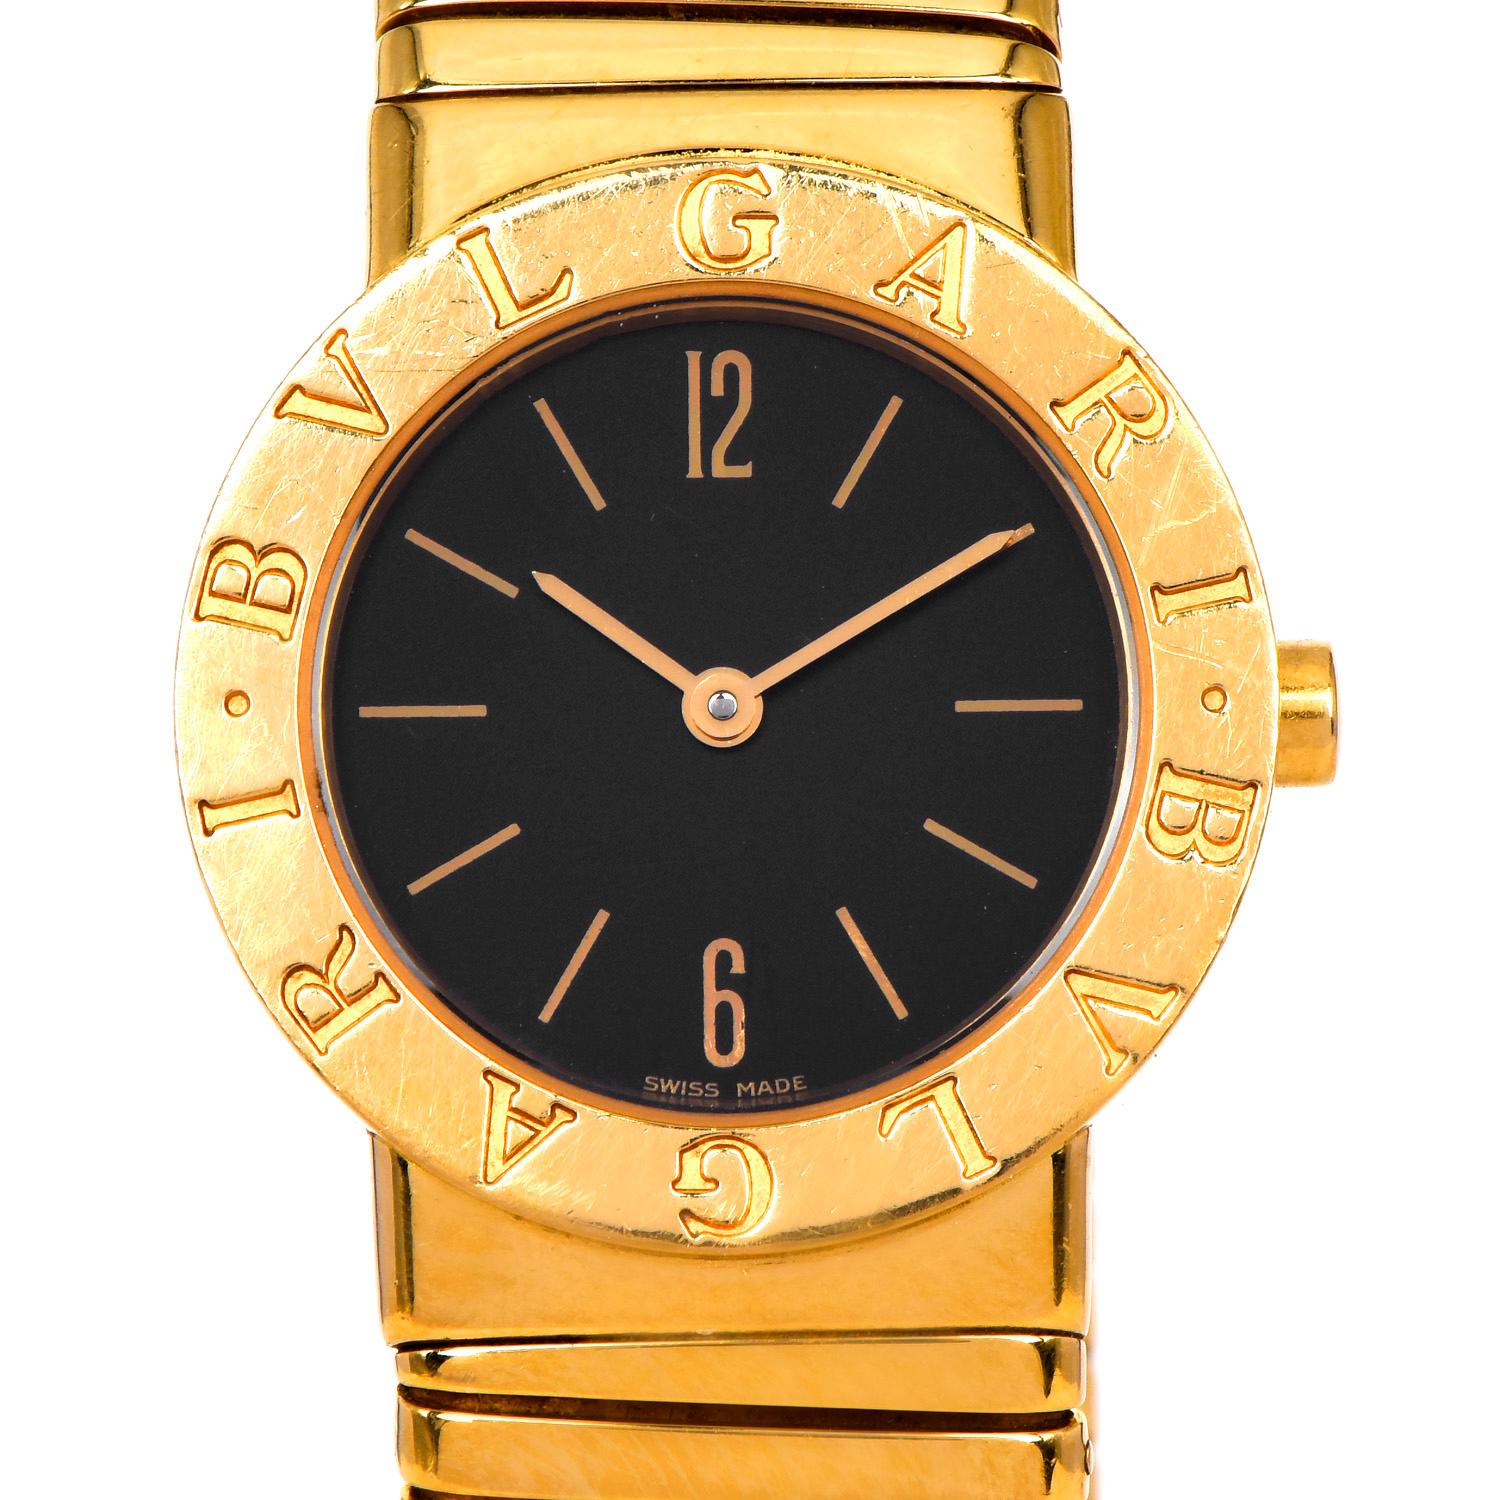 This midsize Ladies Bvlgari Bulgari Tubogas watch in 18k yellow gold, a timeless highly desired masterpiece, perfect for everyday wear.

It has a beautiful black dial with gold numeral markers. Watch, dial, case, band, all signed Bvlgari.

Weighs